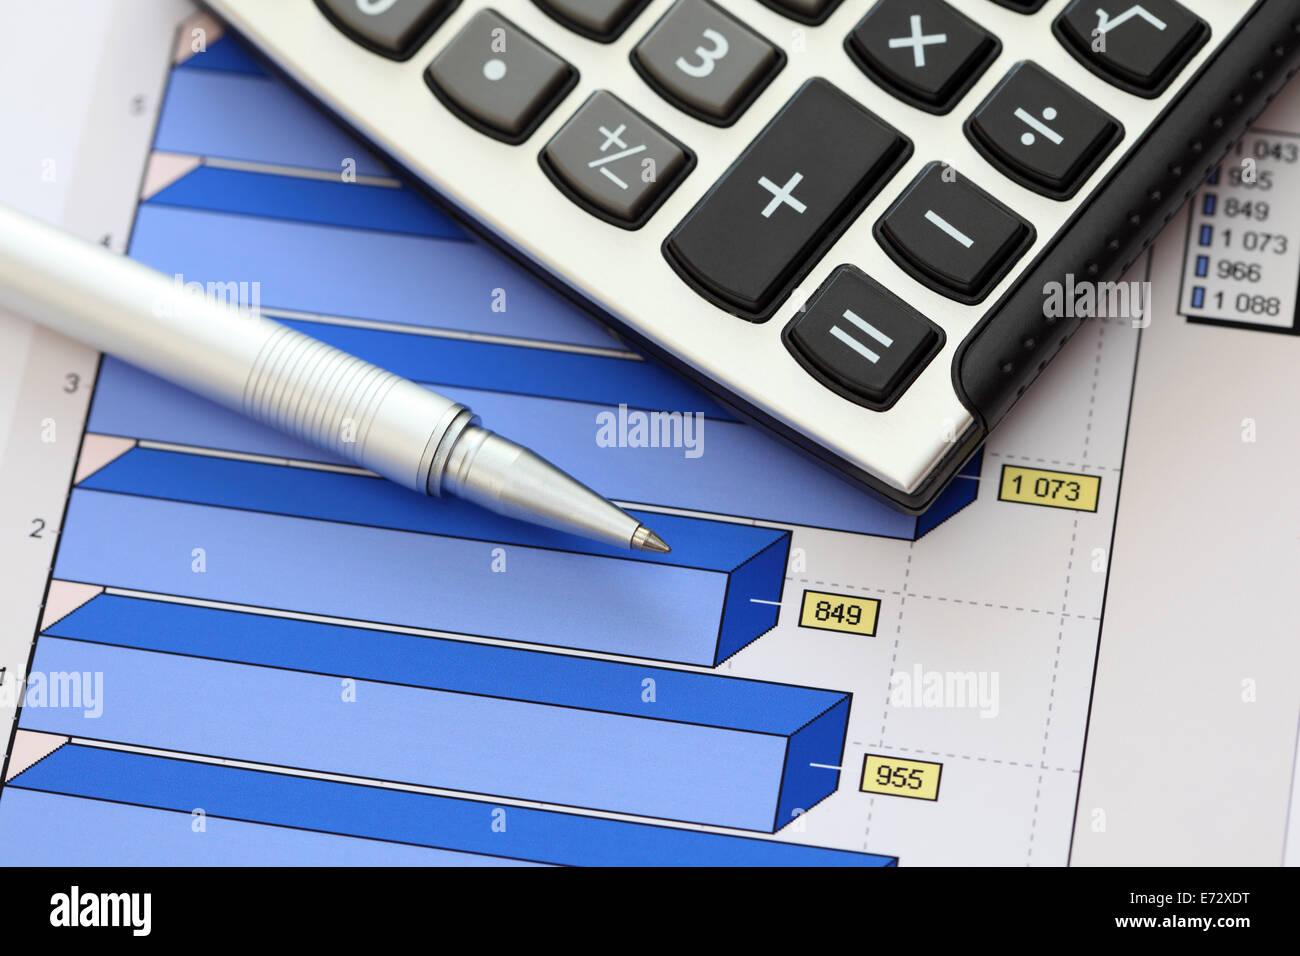 Financial statements. Business Graph. Ballpoint pen and calculator on a financial chart or Stock Market Data. Stock Photo